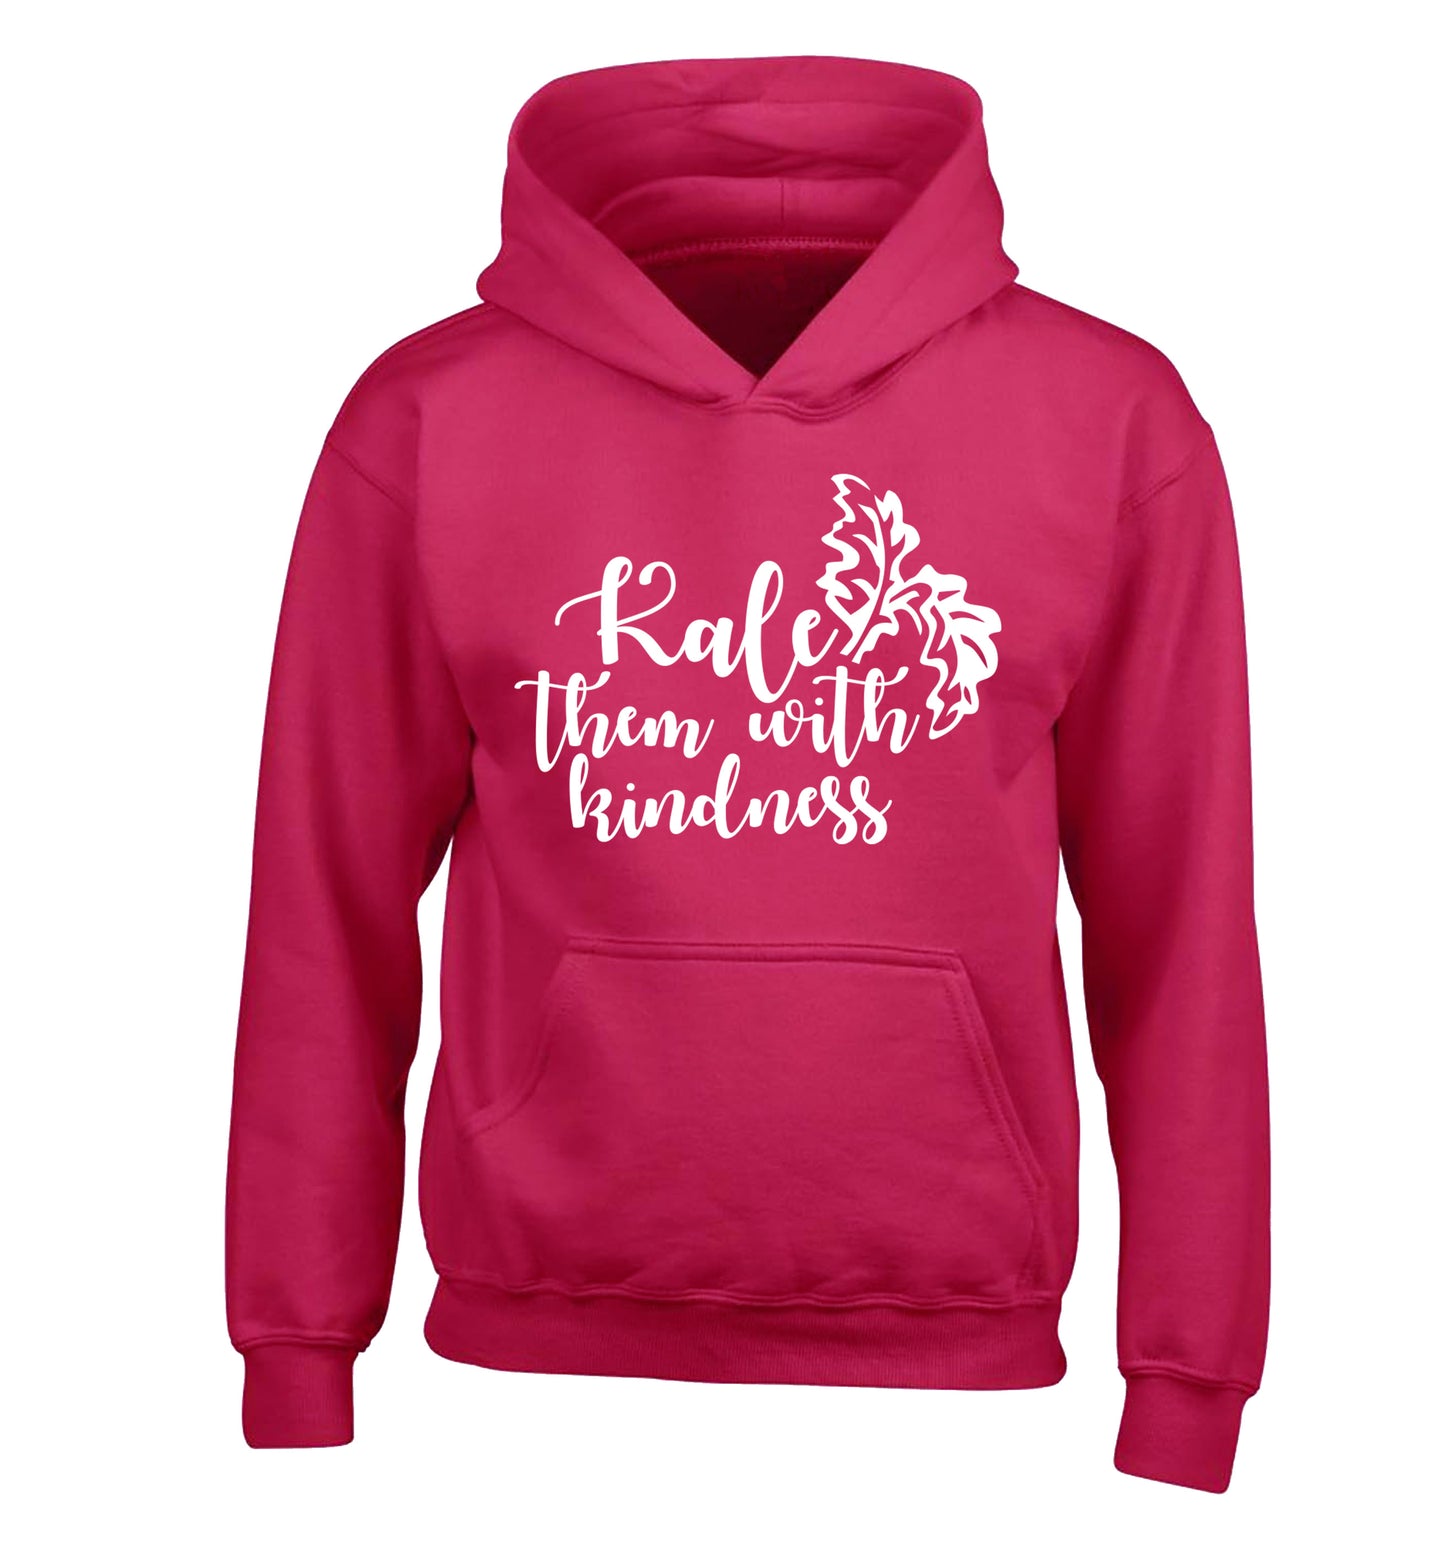 Kale them with kindness children's pink hoodie 12-14 Years